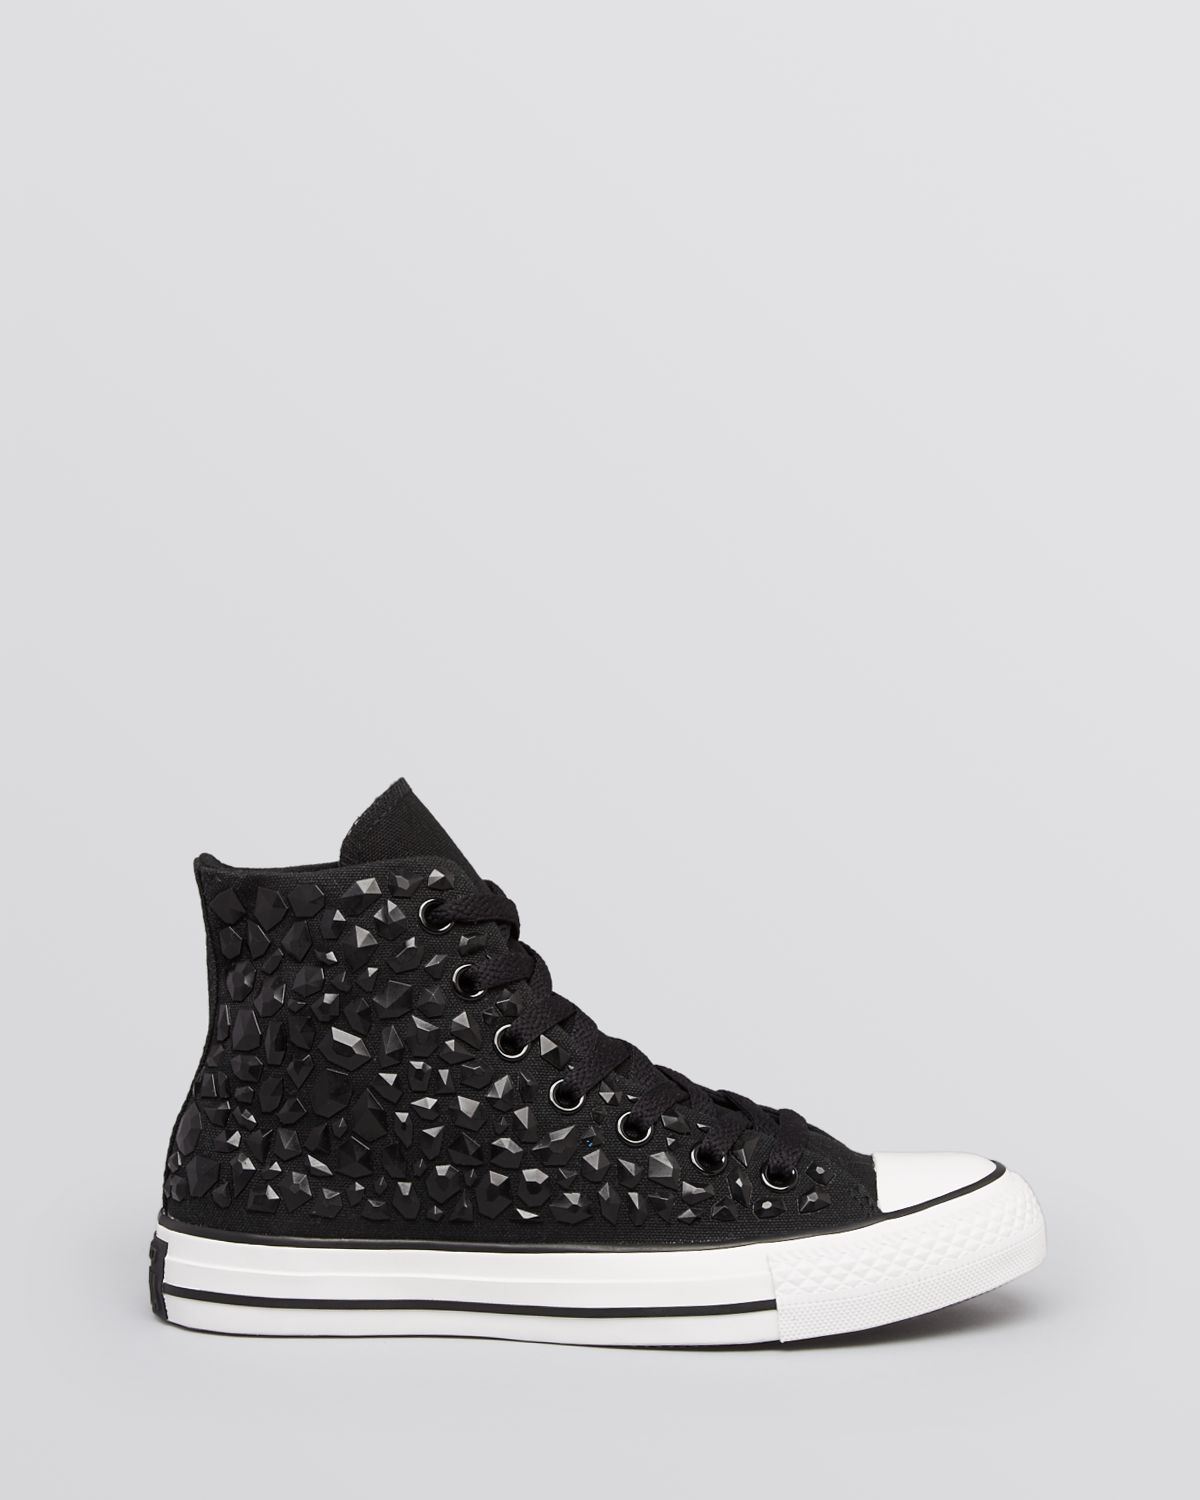 Converse Lace Up High Top All Star Rhinestone in Black Lyst